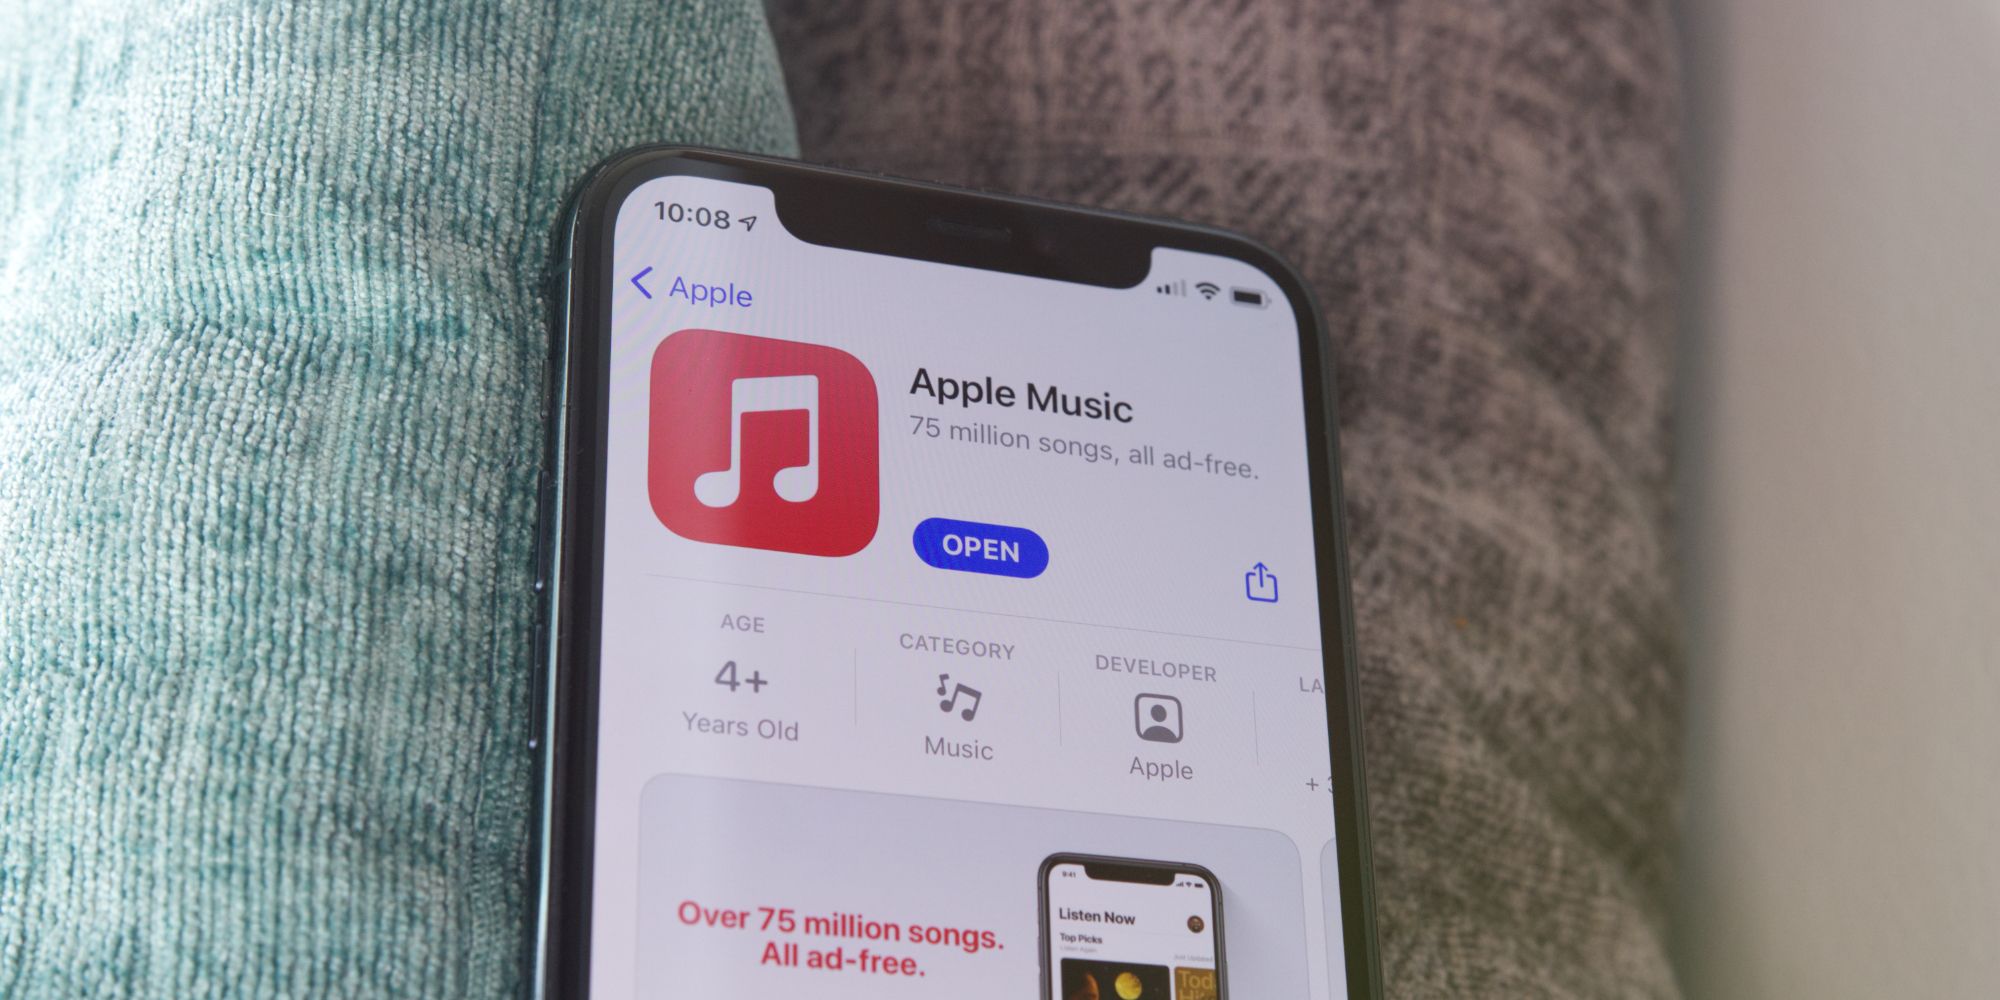 Apple Music in the App Store on an iPhone